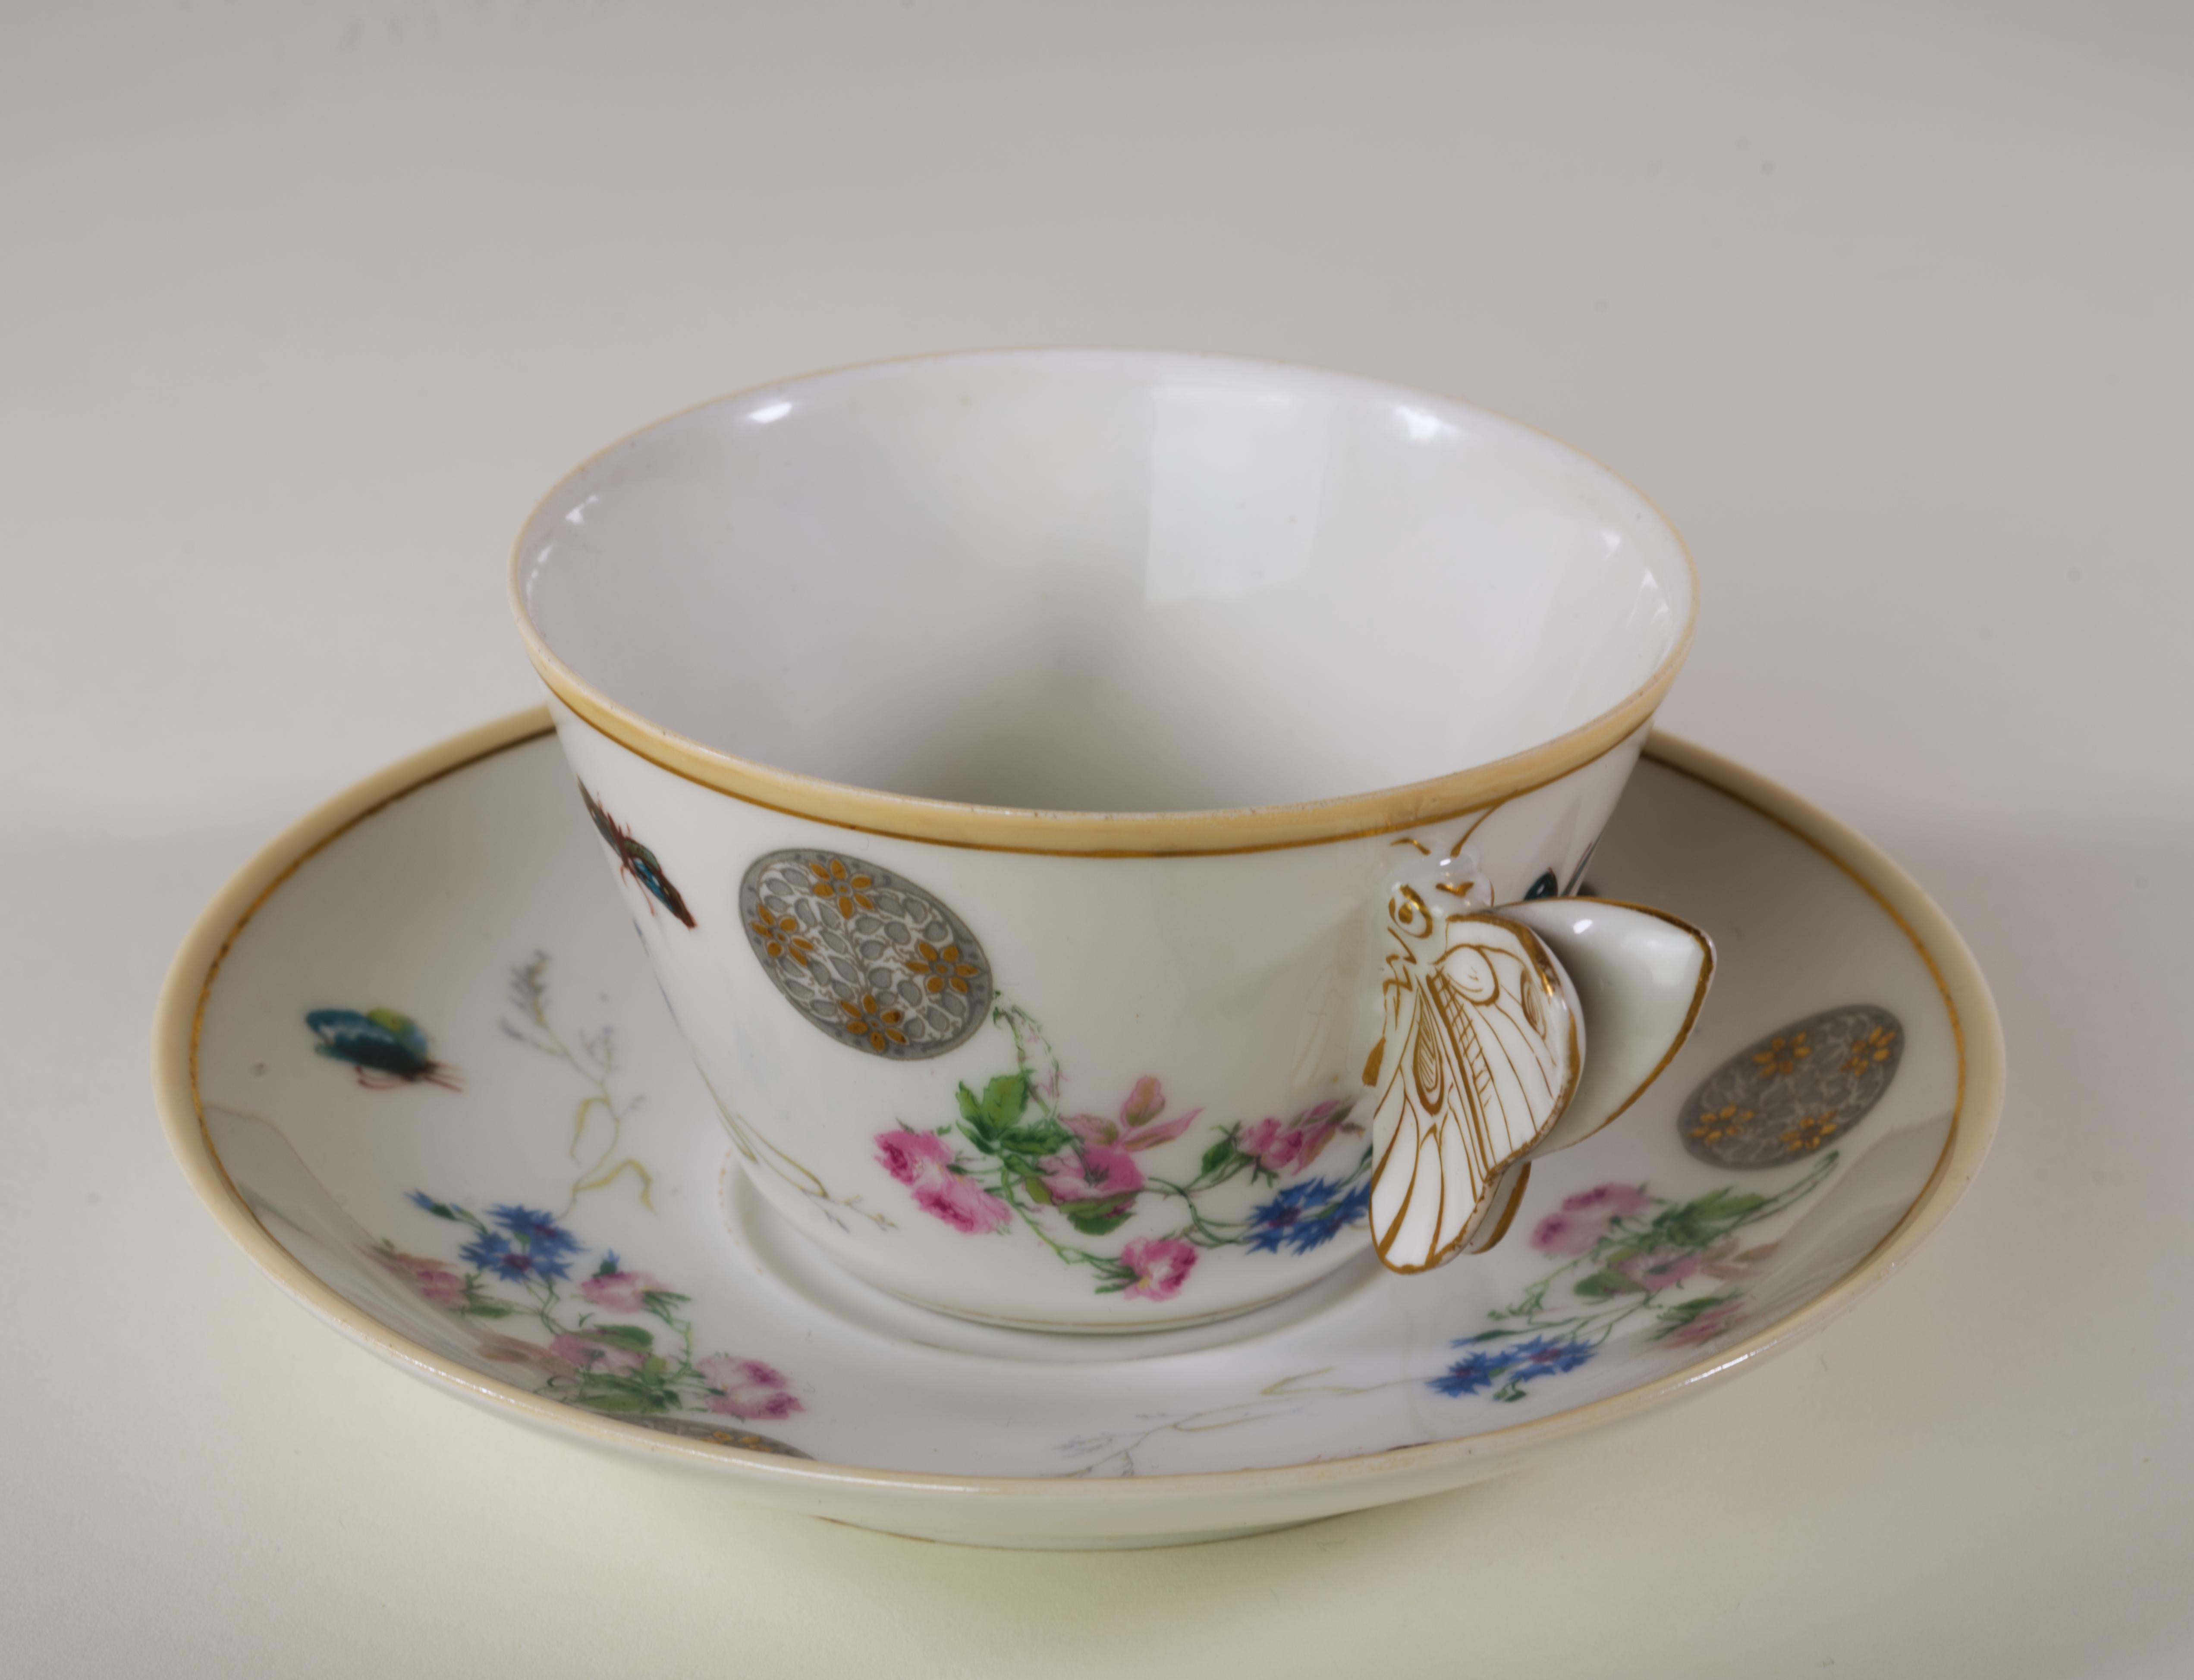 Aesthetic Movement Haviland Limoges Butterfly Handled Cup and saucer set, 1879-1889, Aesthetic  For Sale